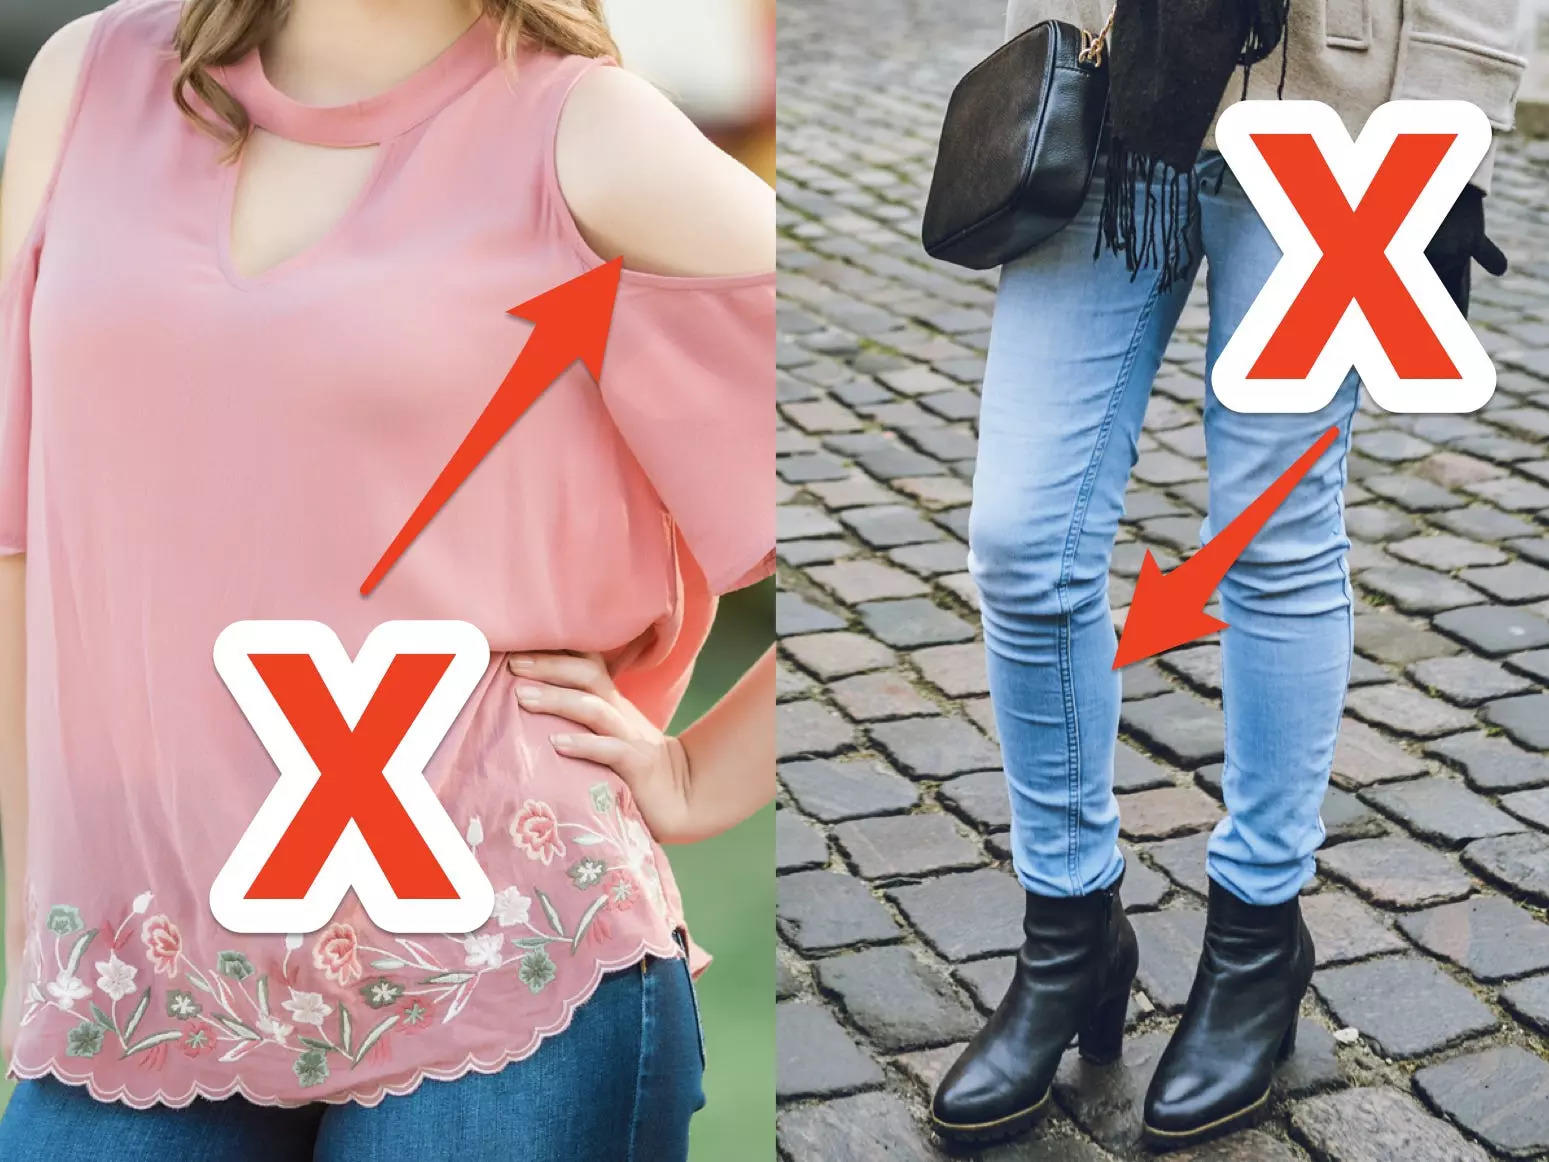 
Stylists reveal 12 items from your 2021 wardrobe that you should get rid of
